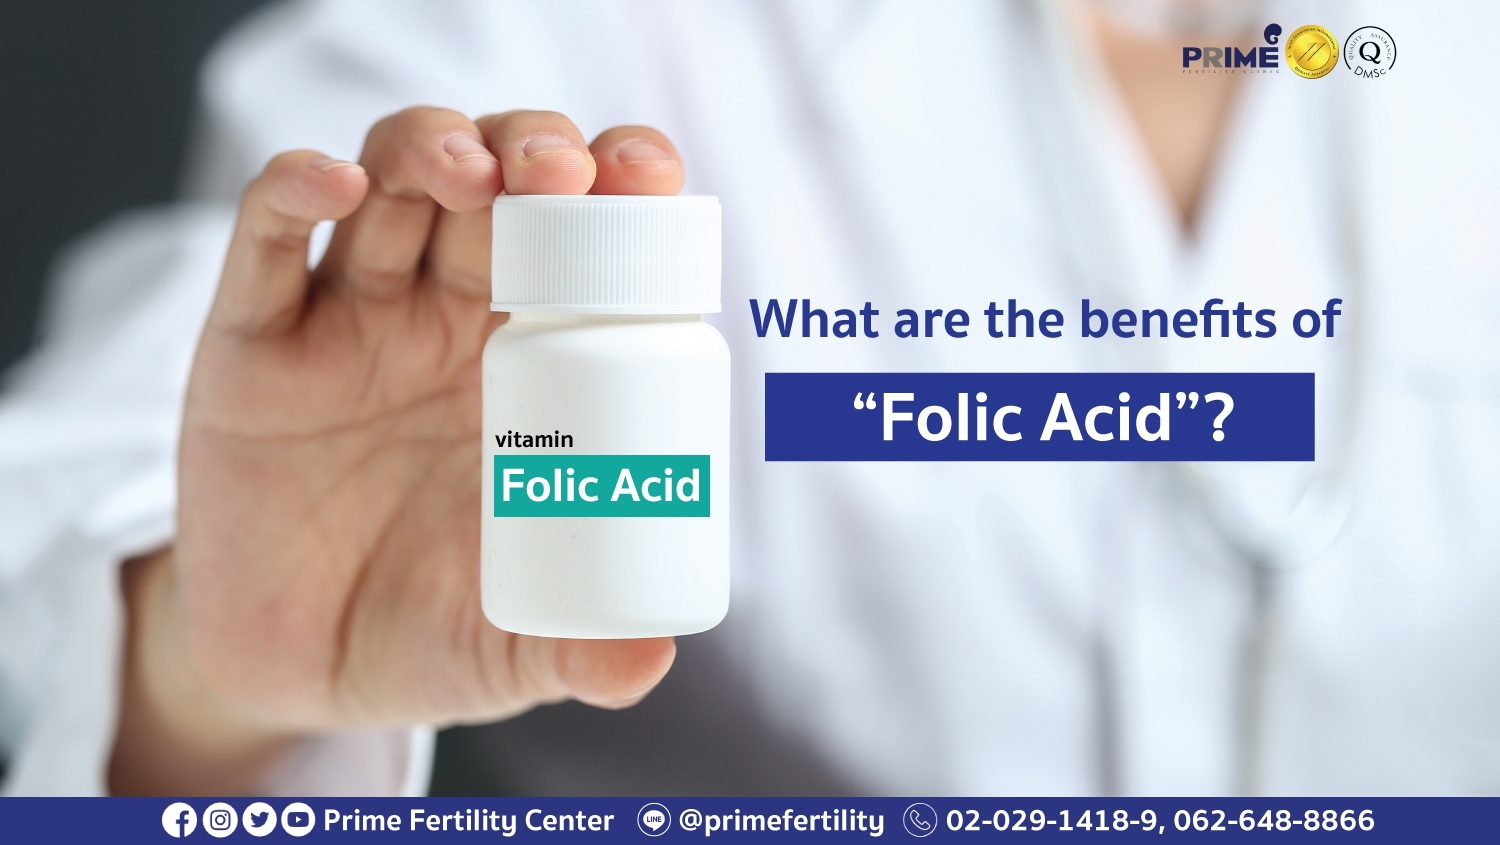 What are the benefits of “Folic Acid”?